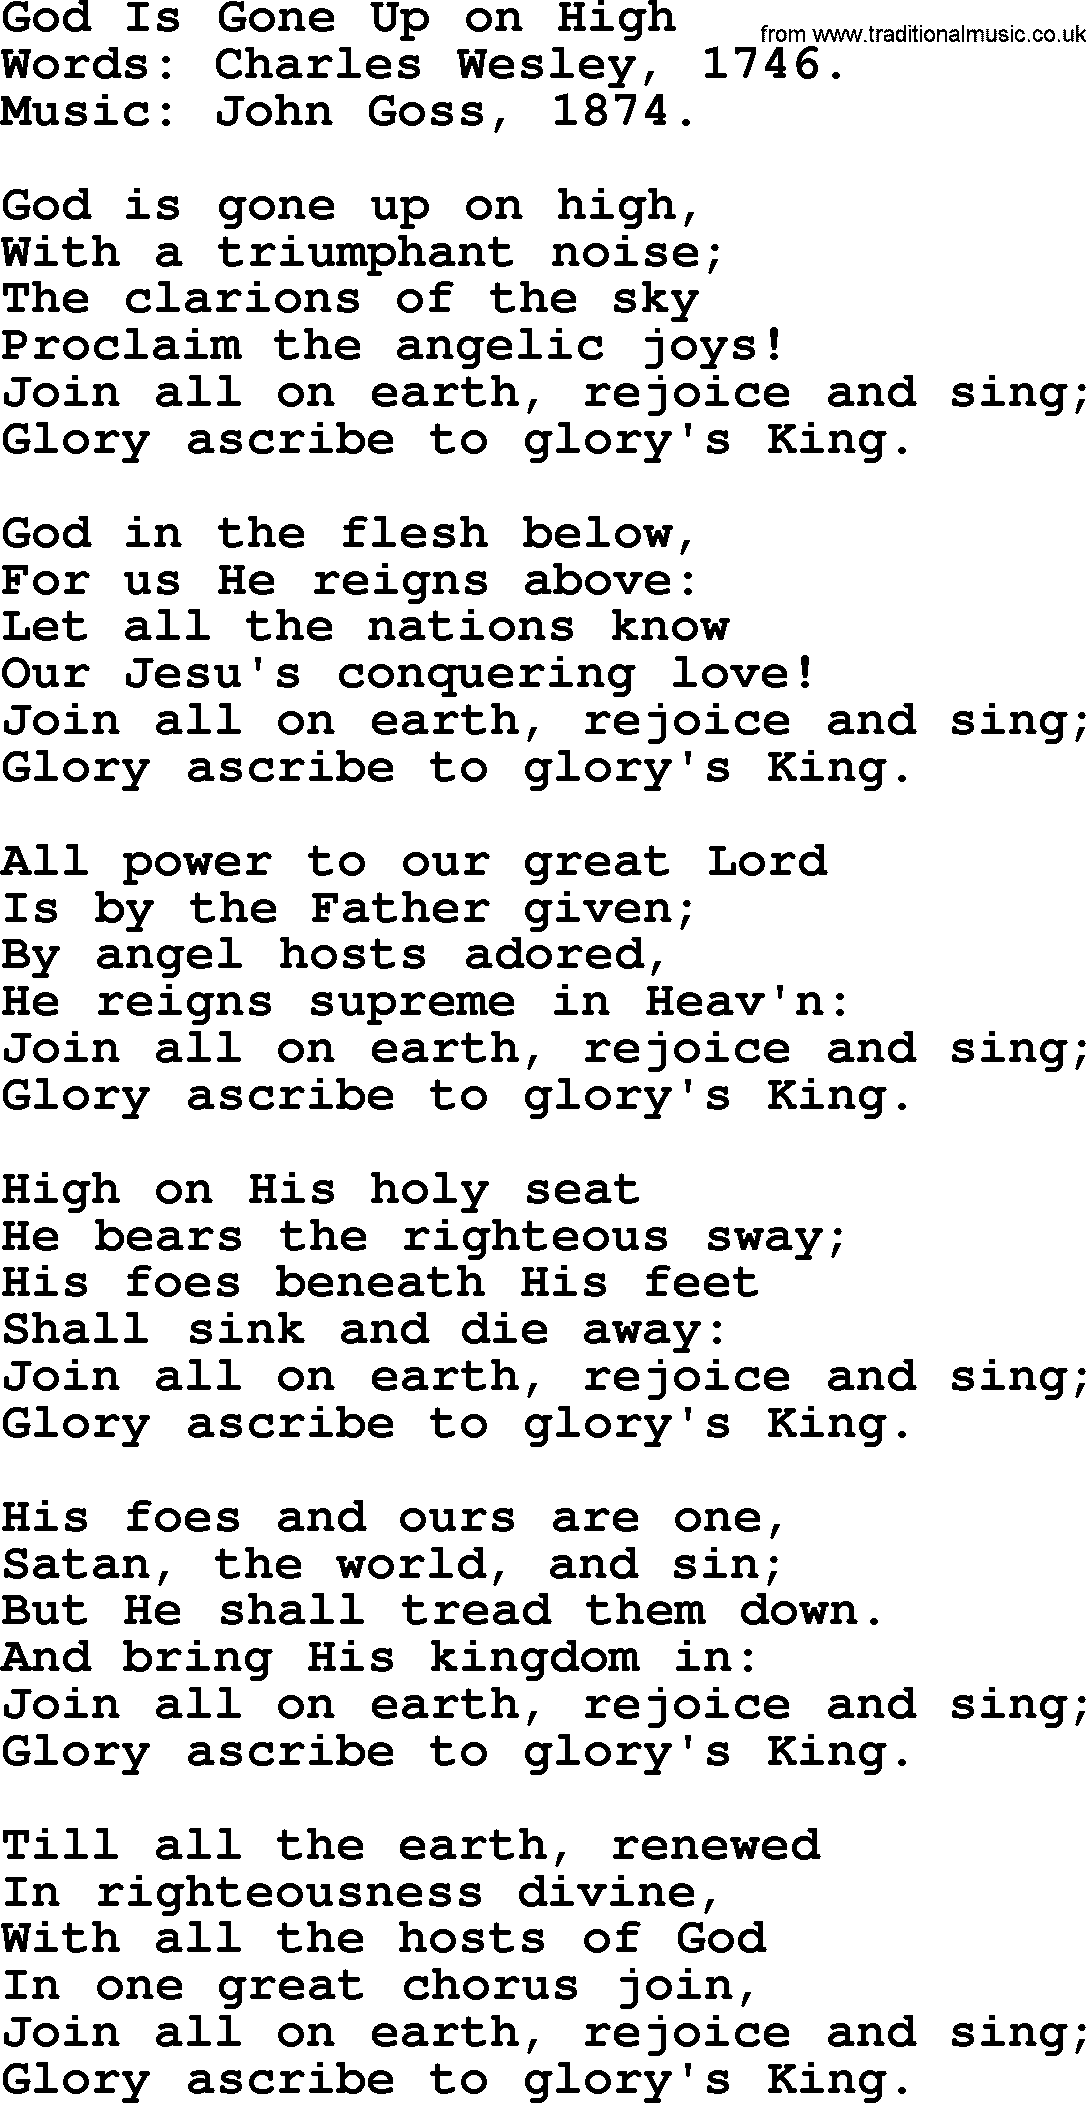 Hymns about Angels, Hymn: God Is Gone Up On High.txt lyrics with PDF